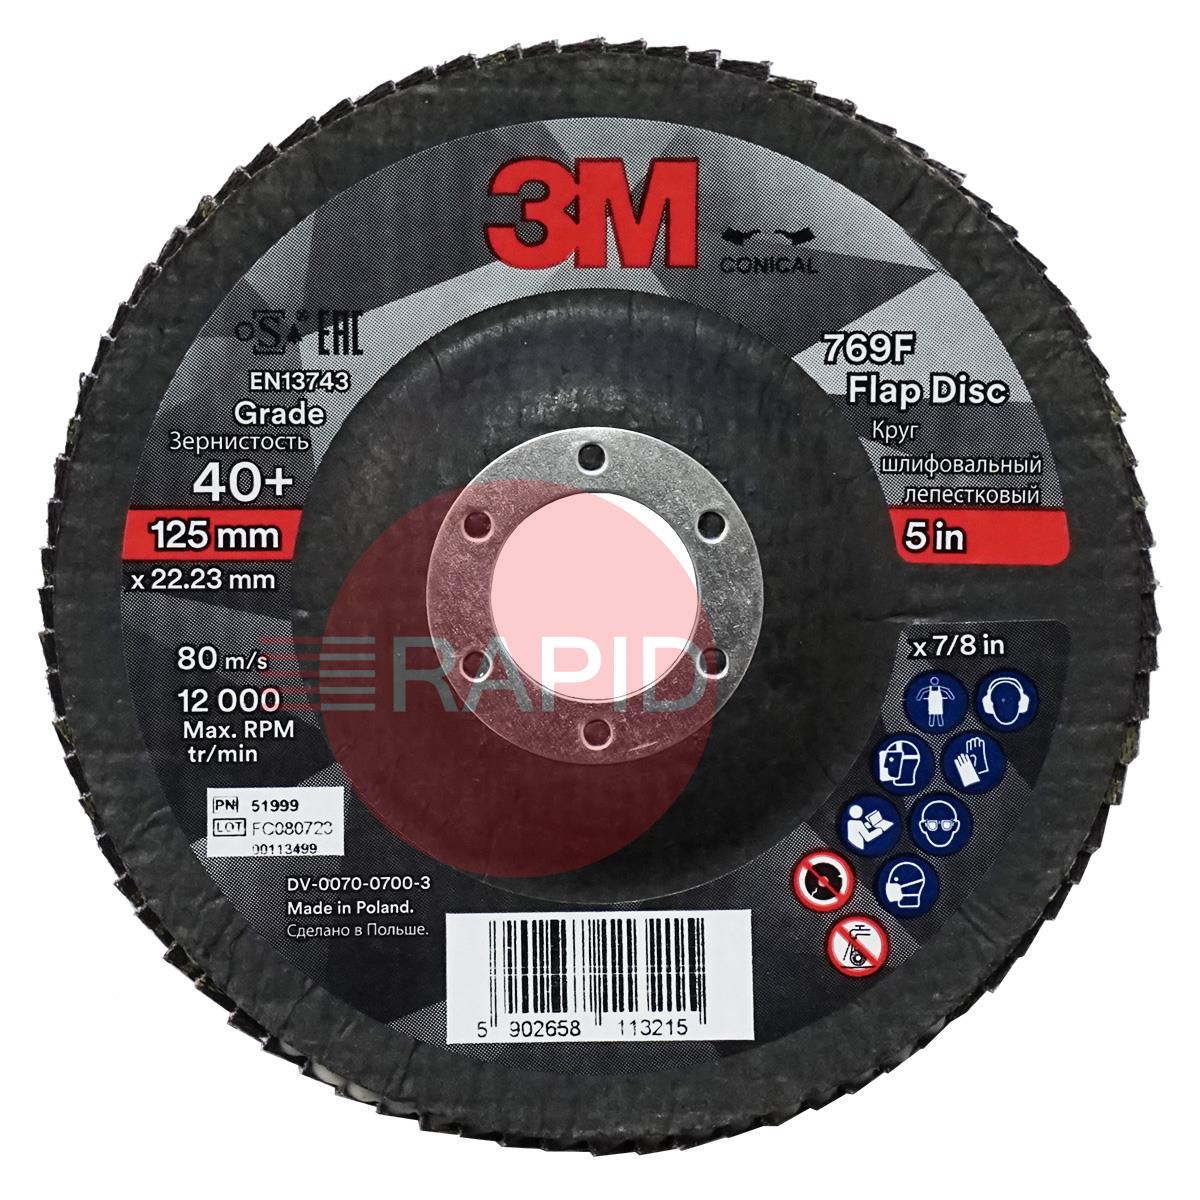 3M-51999  3M Silver Conical Flap Disc 769F 125mm x 22.23mm, 40+ Grit (Box of 10)